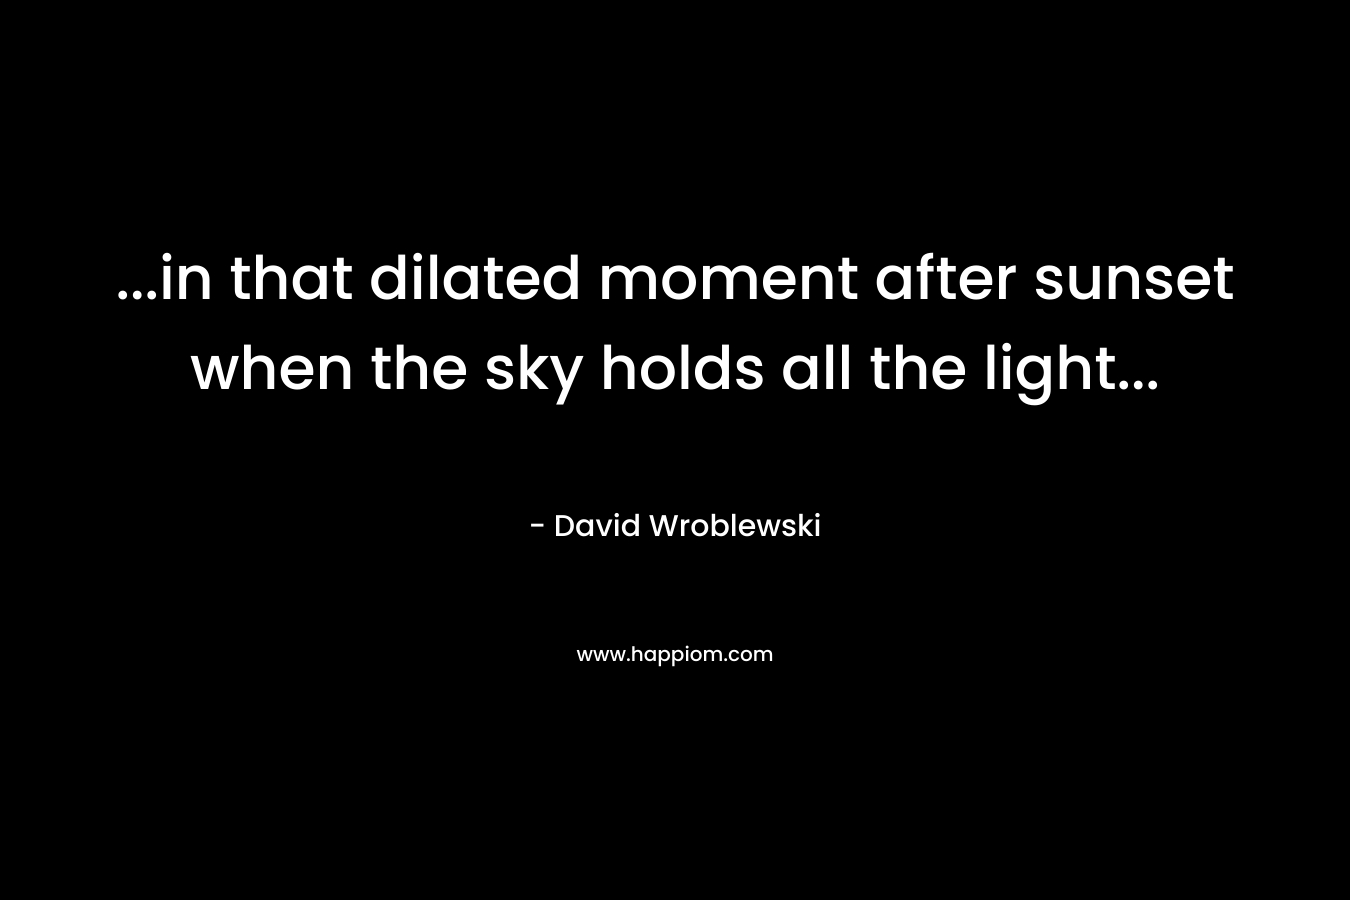 ...in that dilated moment after sunset when the sky holds all the light...